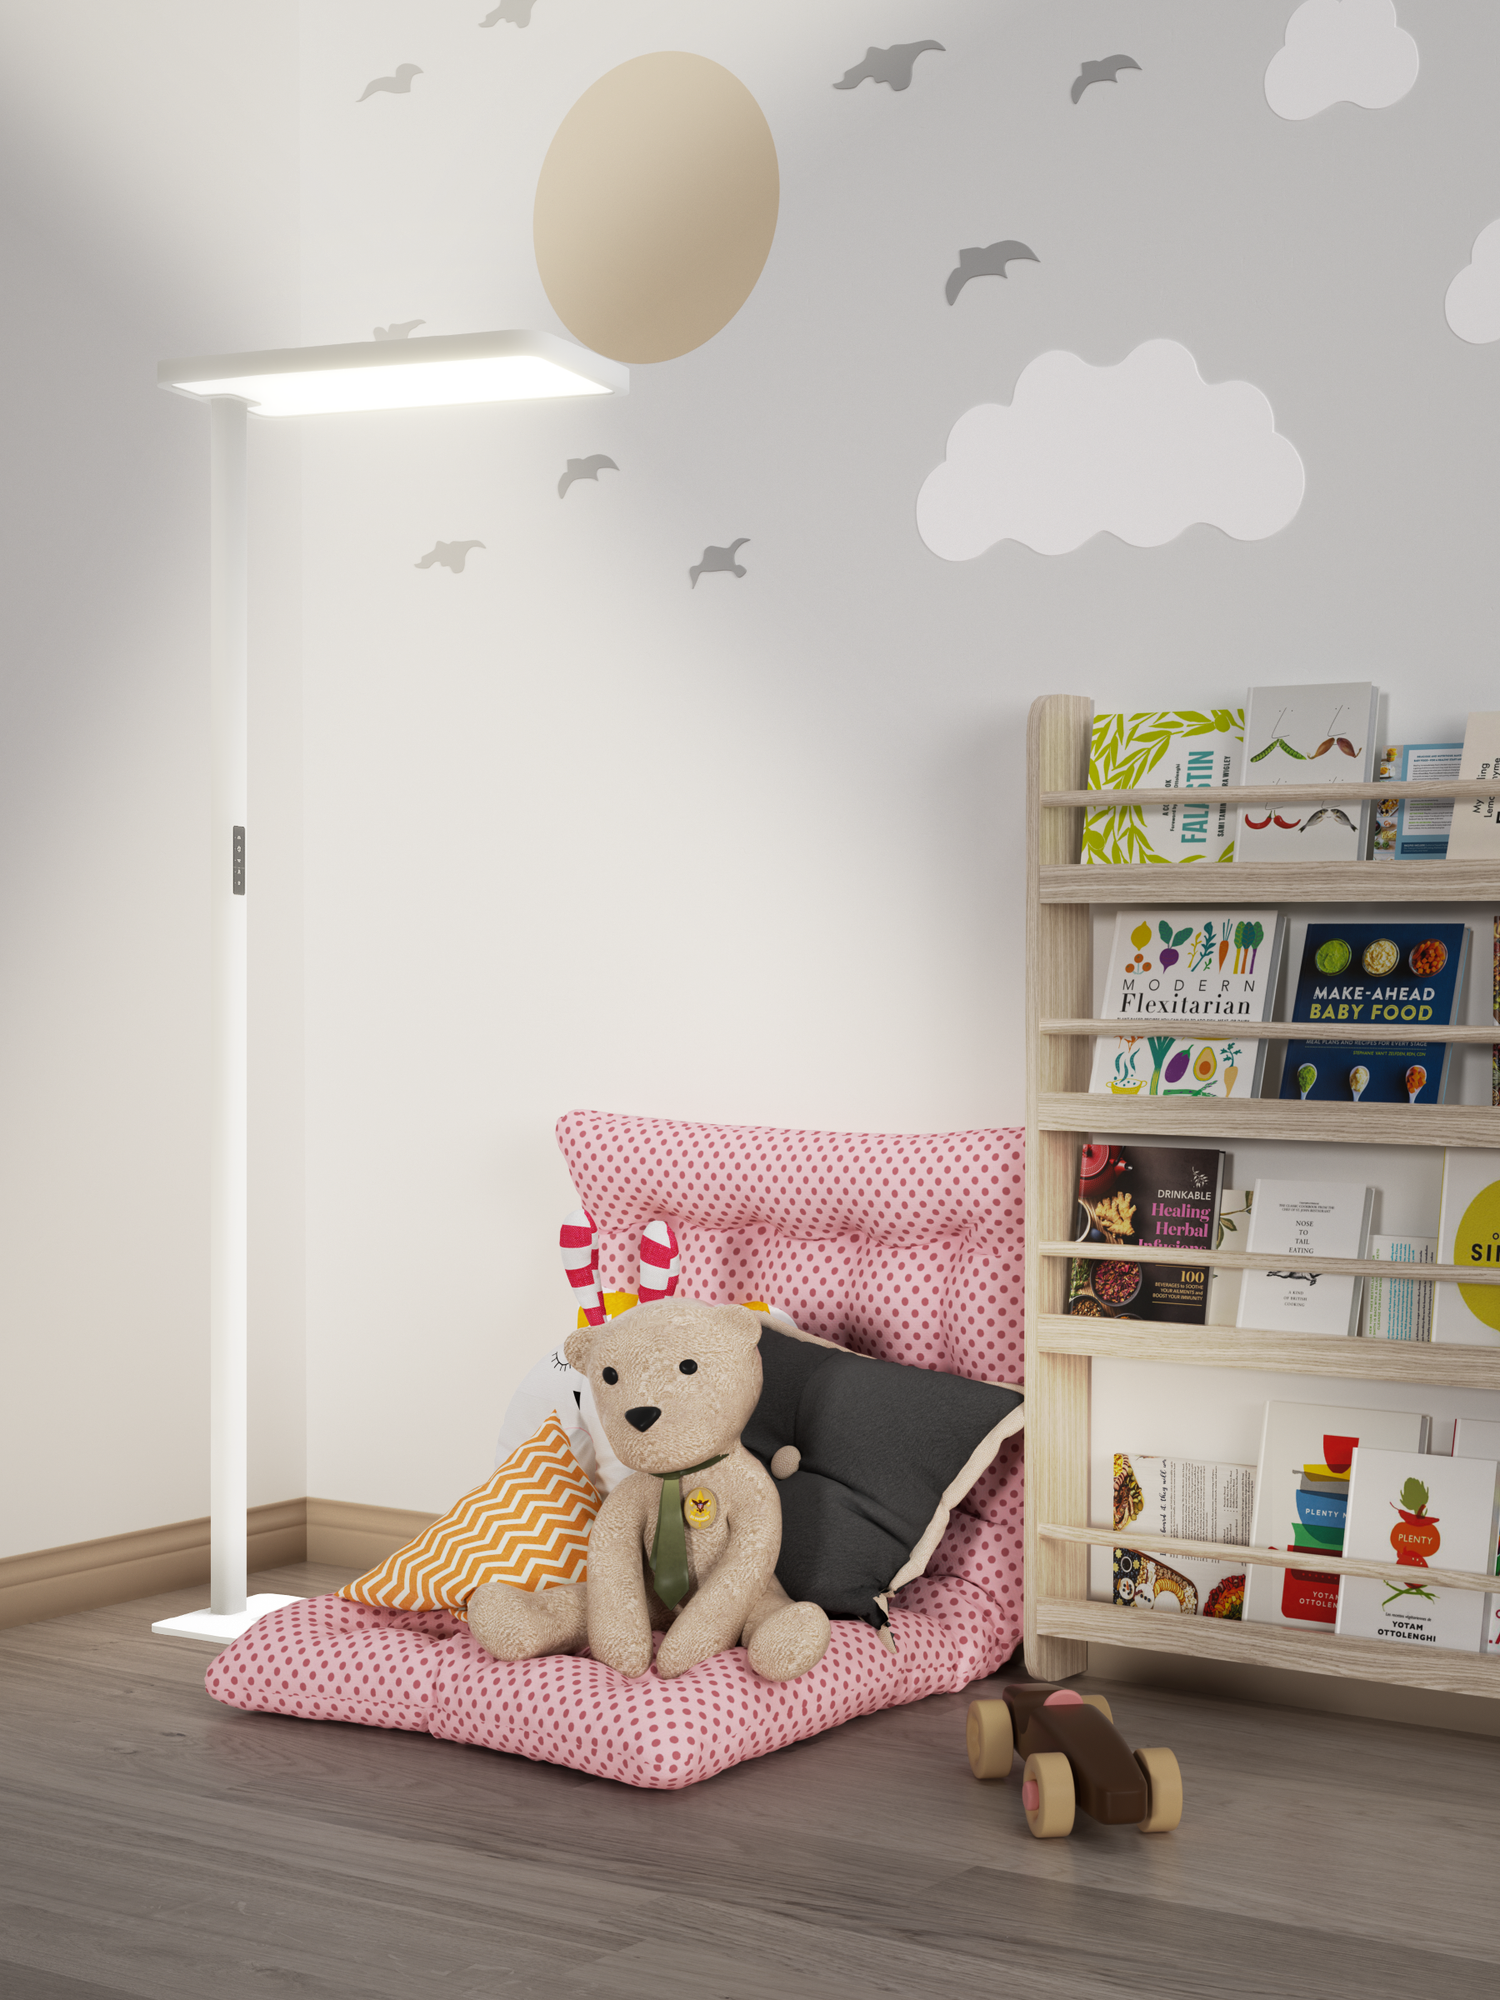 The lamp is lighting up a small kids room full of kids books and stuffed animals it's light is focused on the kids mat where a infant of child would play or read a book.